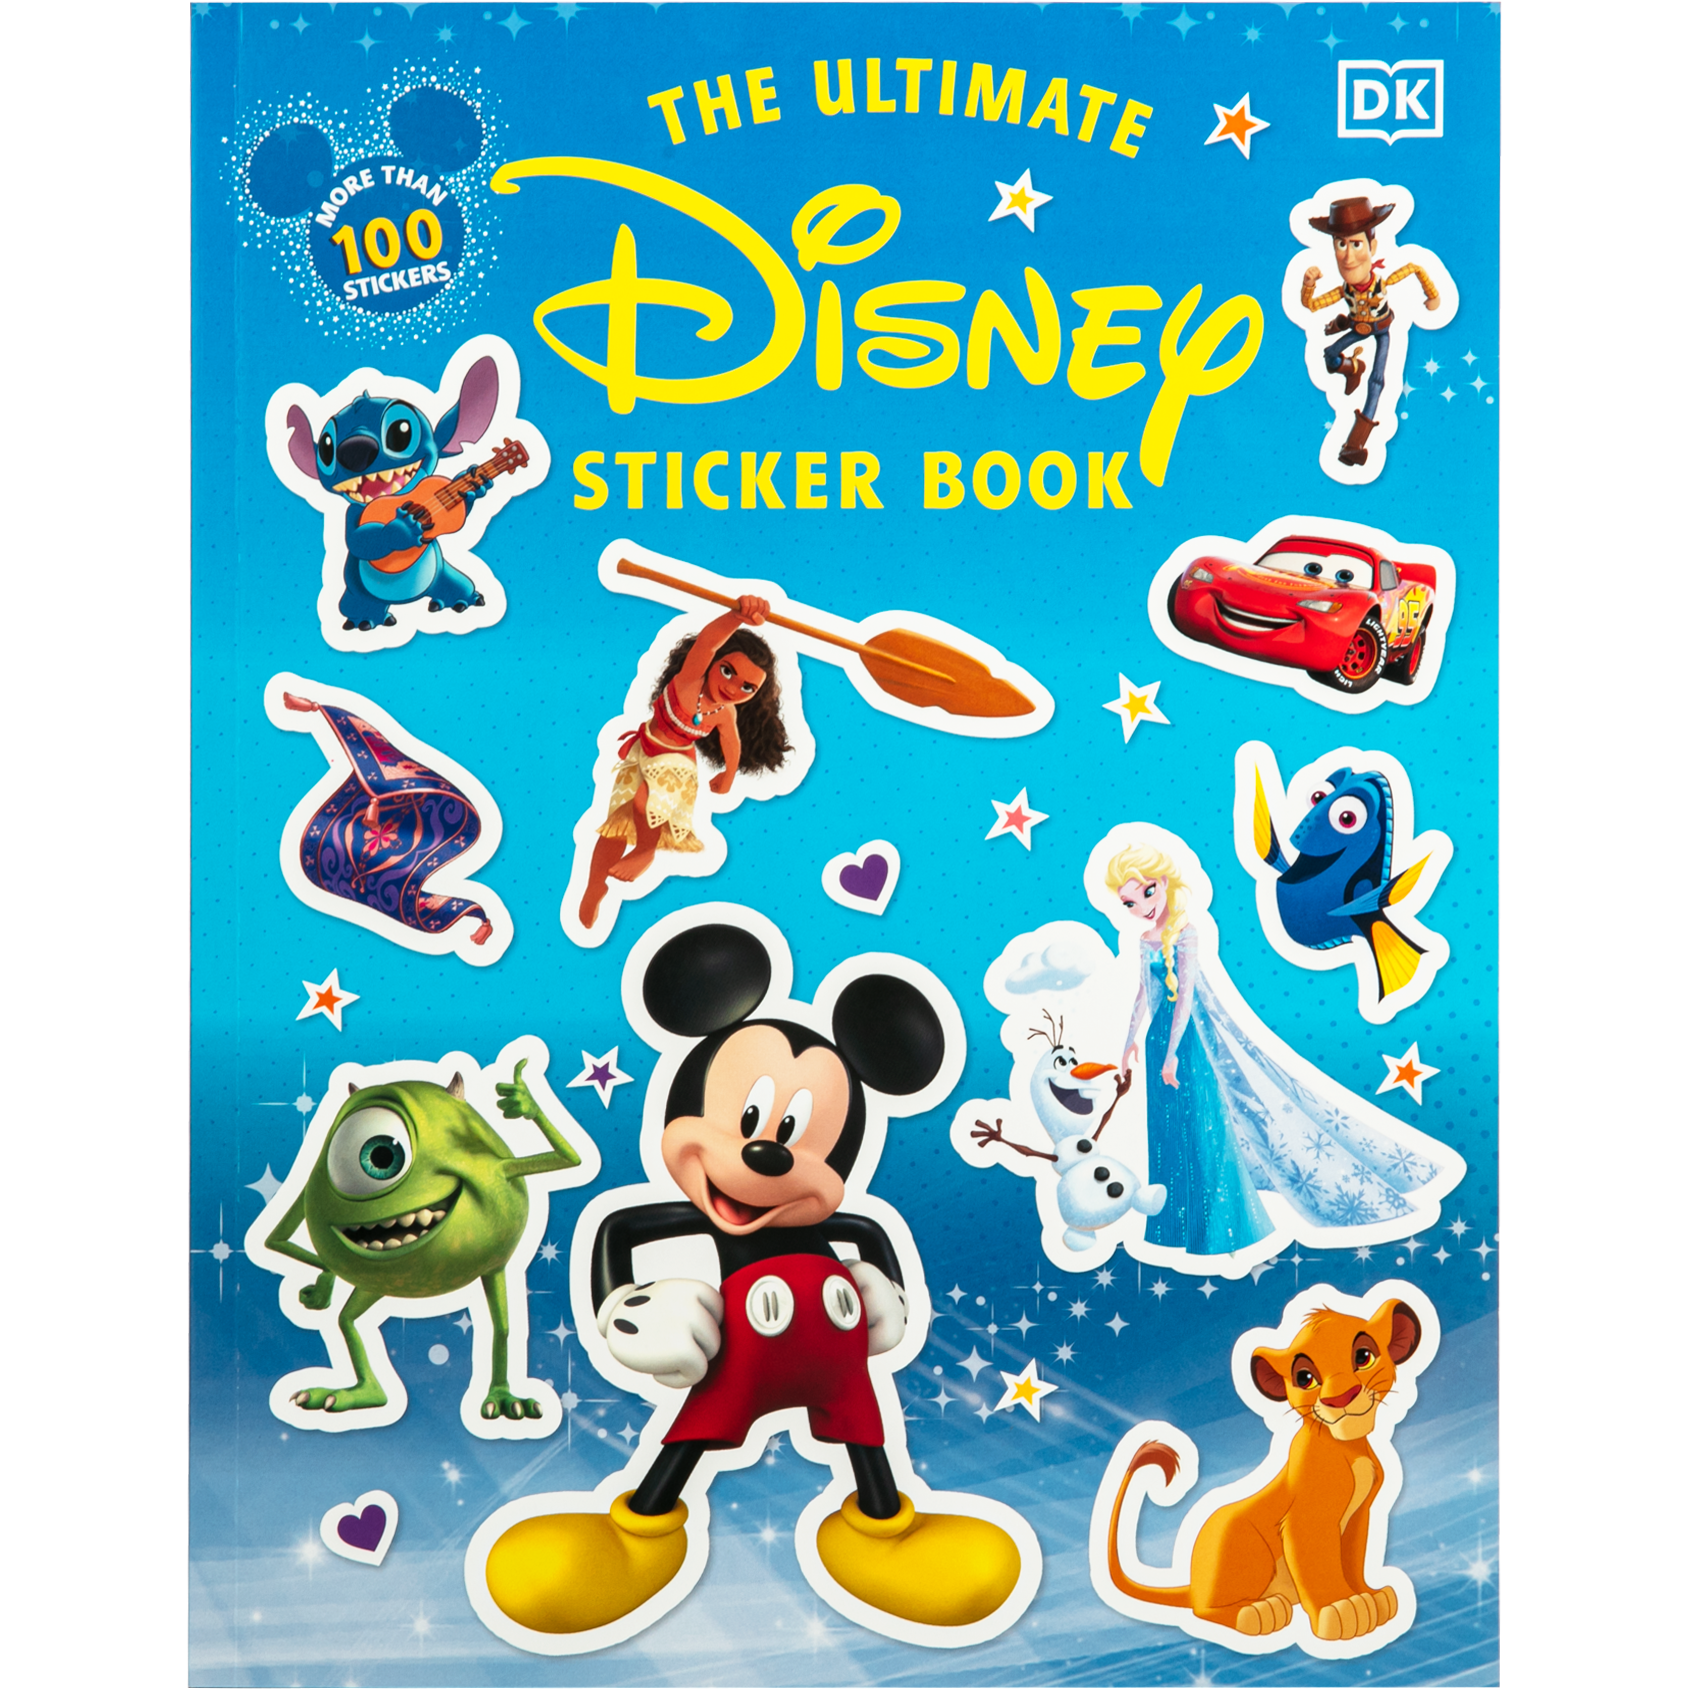 We offer a wide variety of The Ultimate Disney Sticker Book UBD